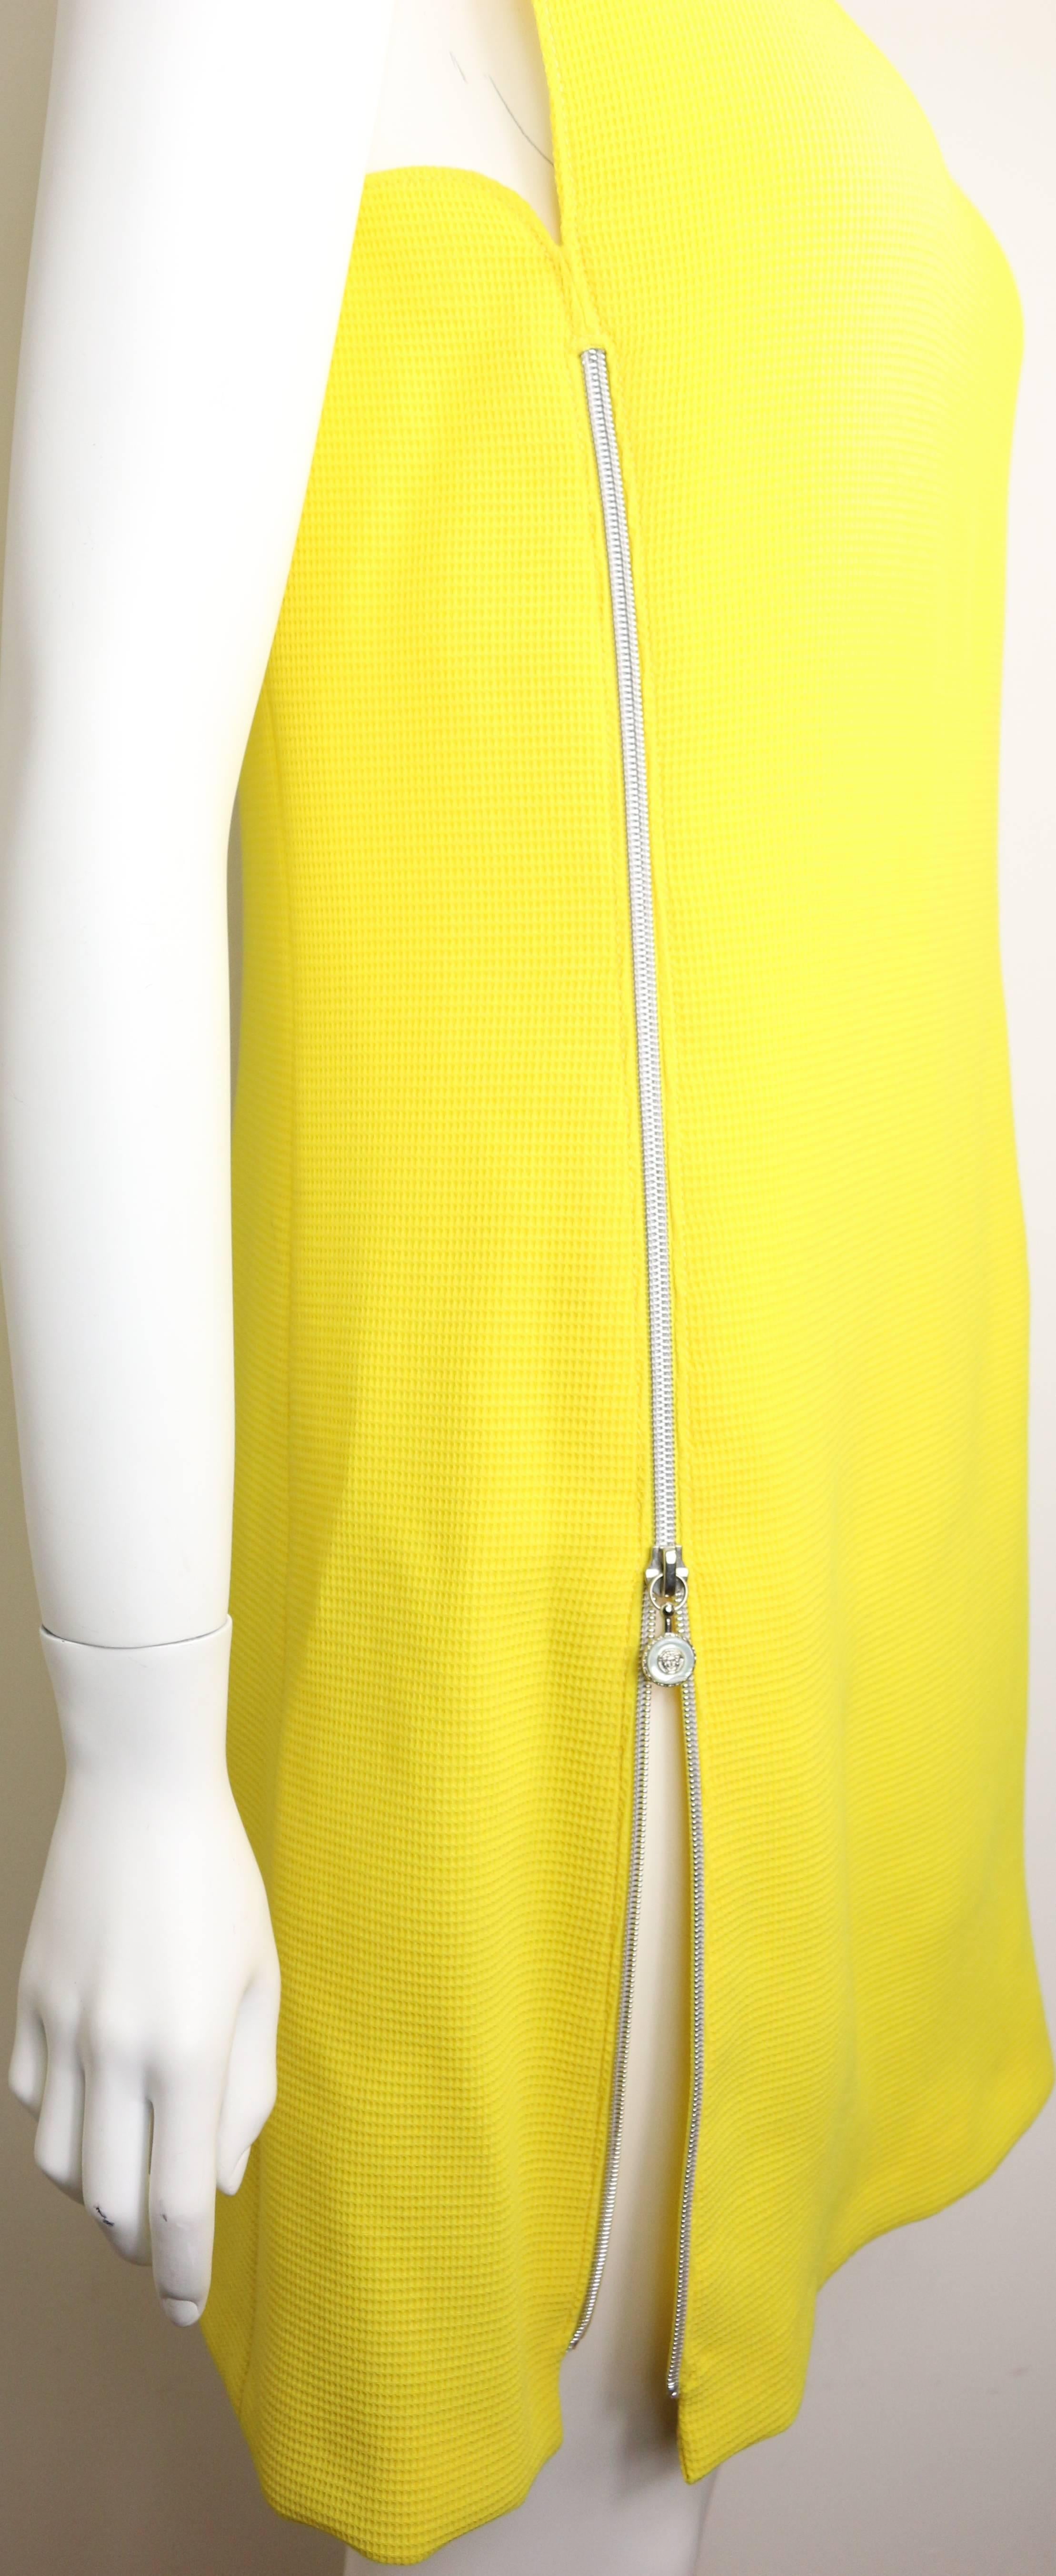 - 90s Gianni Versace Couture yellow dress with vertical Medusa zipper closing on the right and horizontal zipper closing on the left. Classic cut with a twisted. 

- 87% Wool, 13% Silk. 

- Height: 33.5in I Bust: 33in I Waist: 32in

- Size 38. 

-